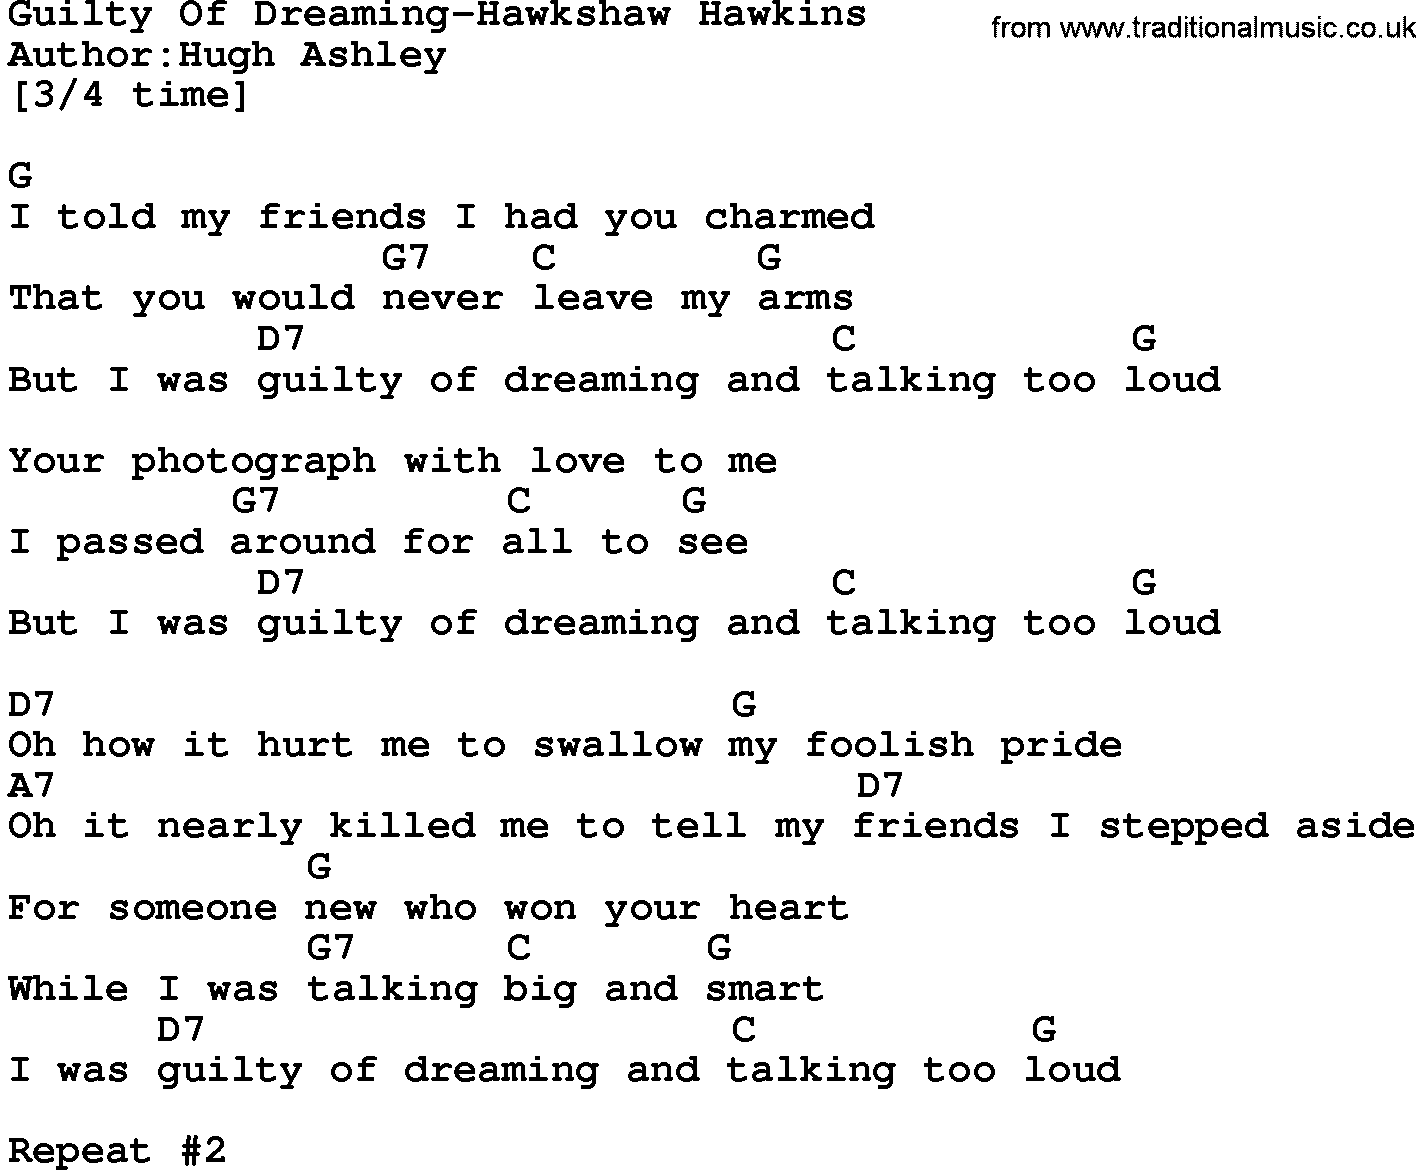 Country music song: Guilty Of Dreaming-Hawkshaw Hawkins lyrics and chords